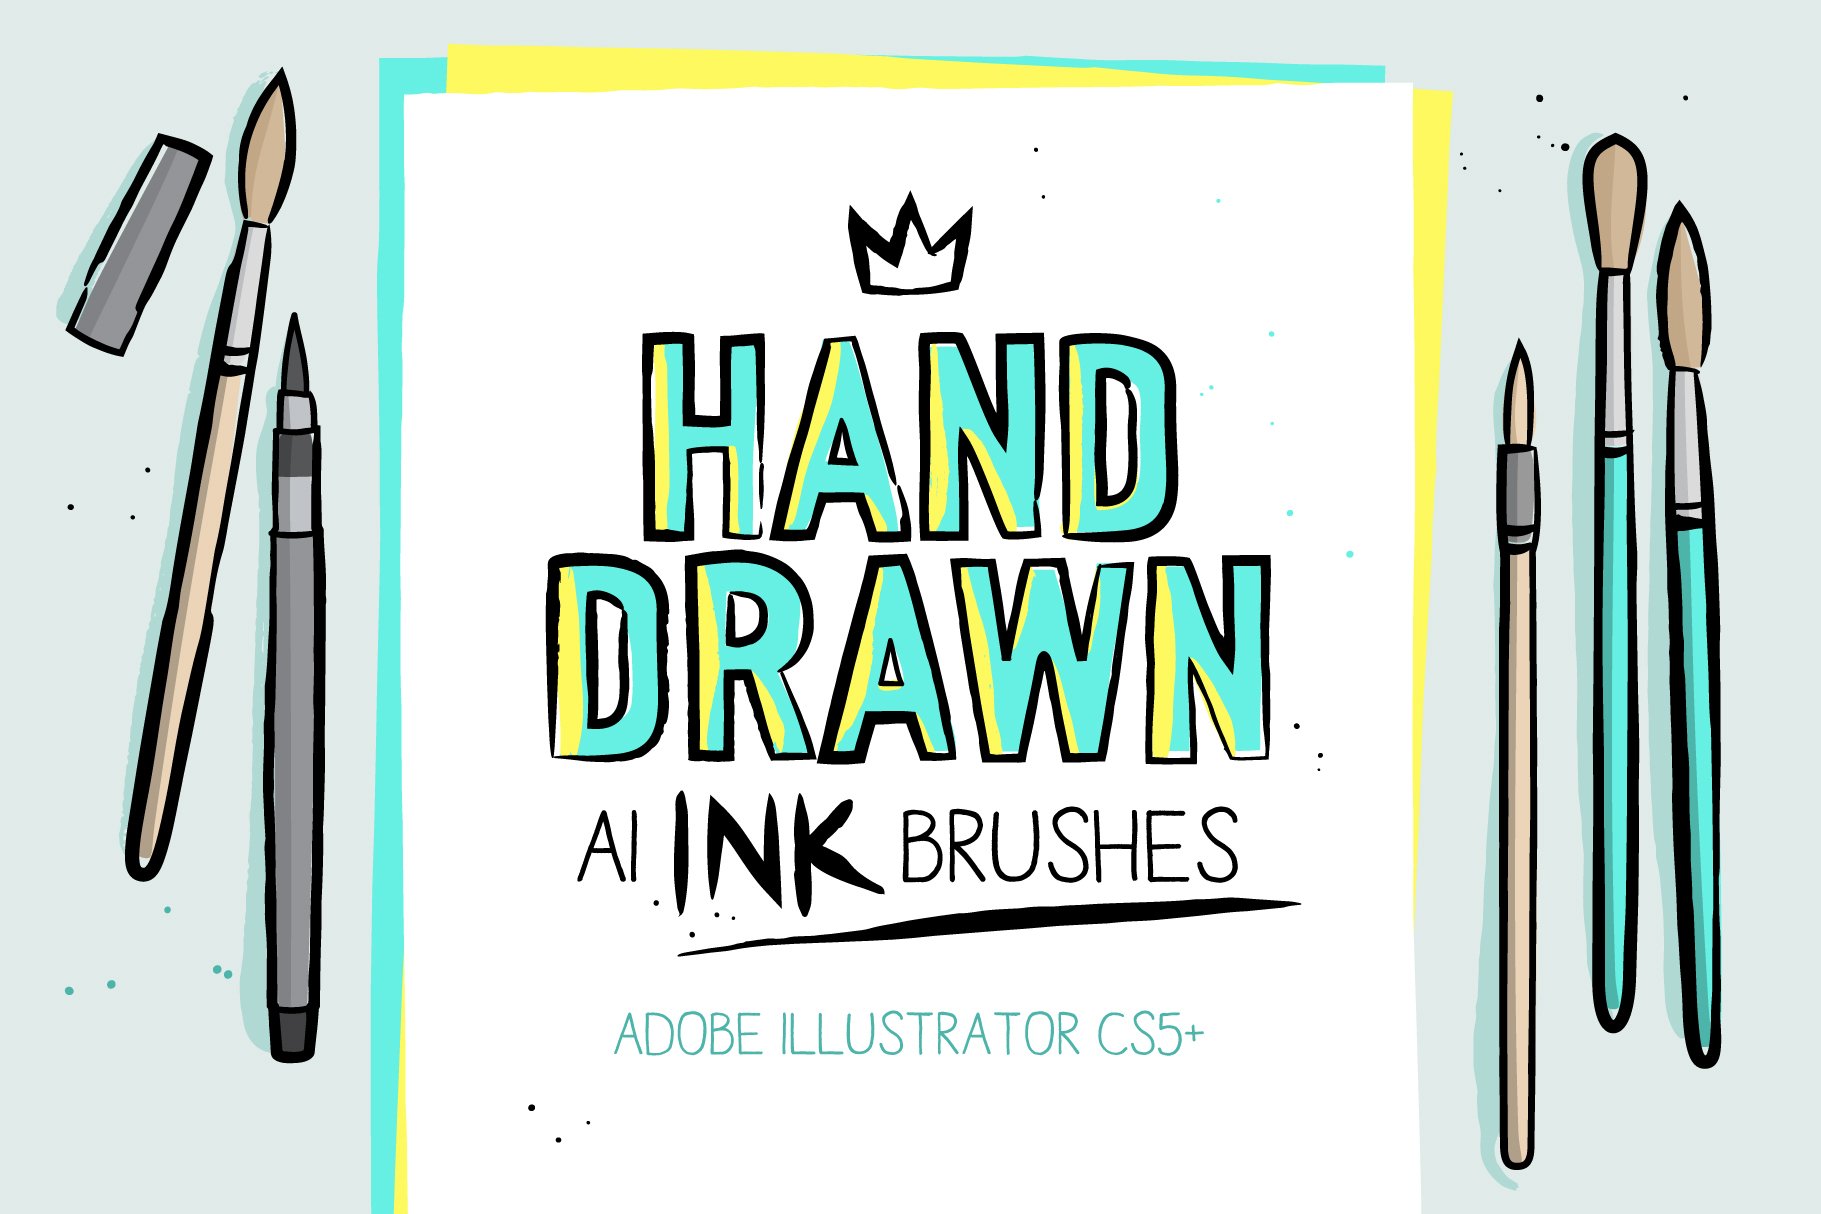 ink brushes preview shop 01 398